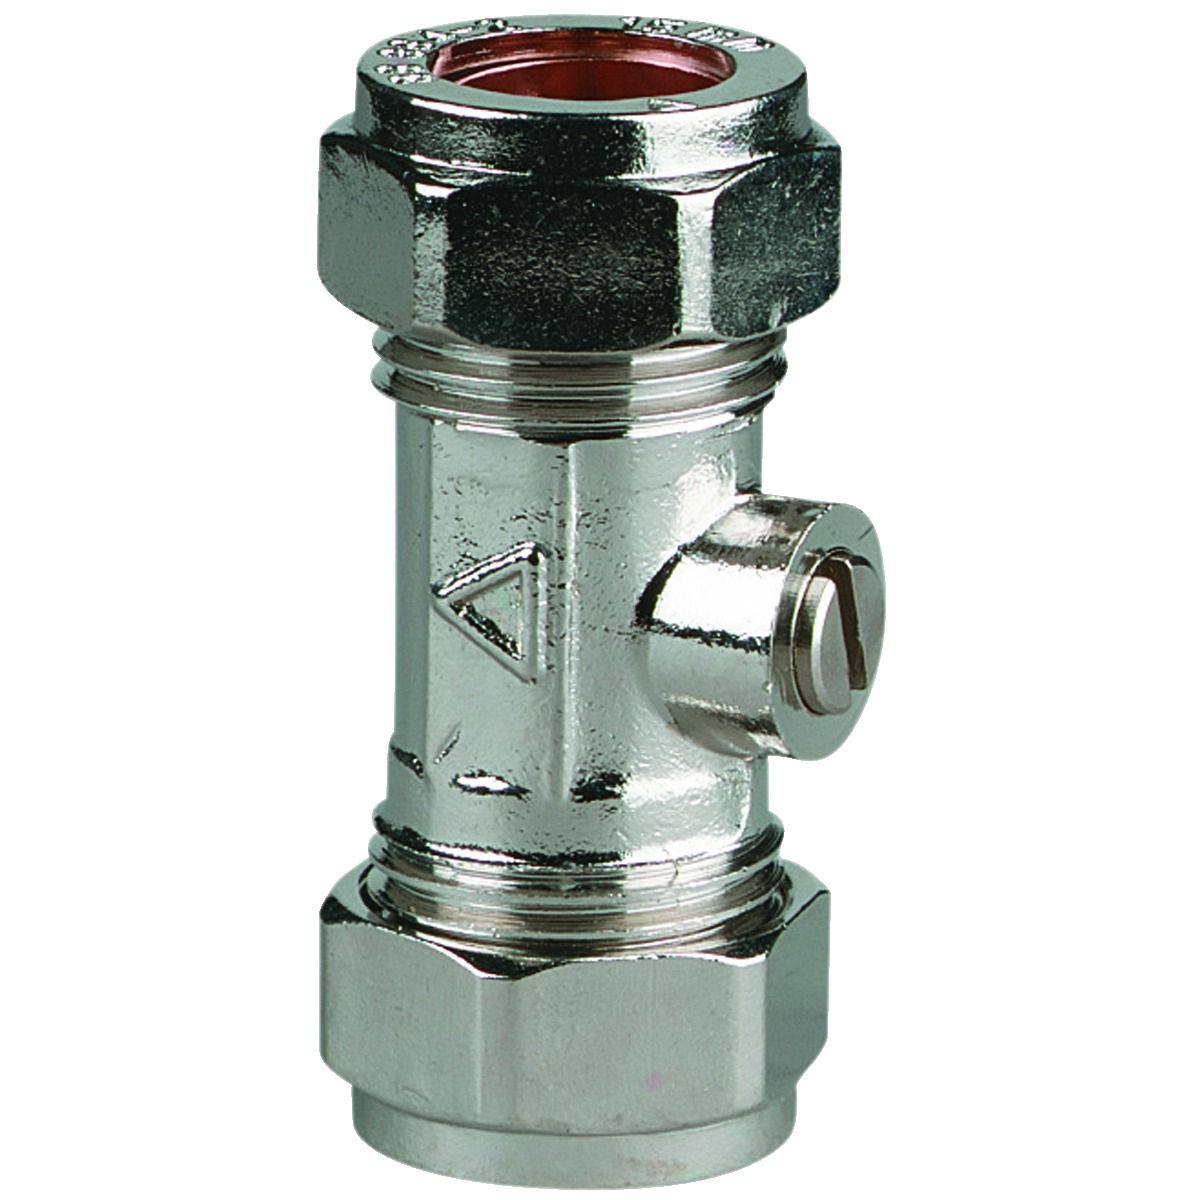 Image of Primaflow Chrome Plated Isolating Valve - 15mm